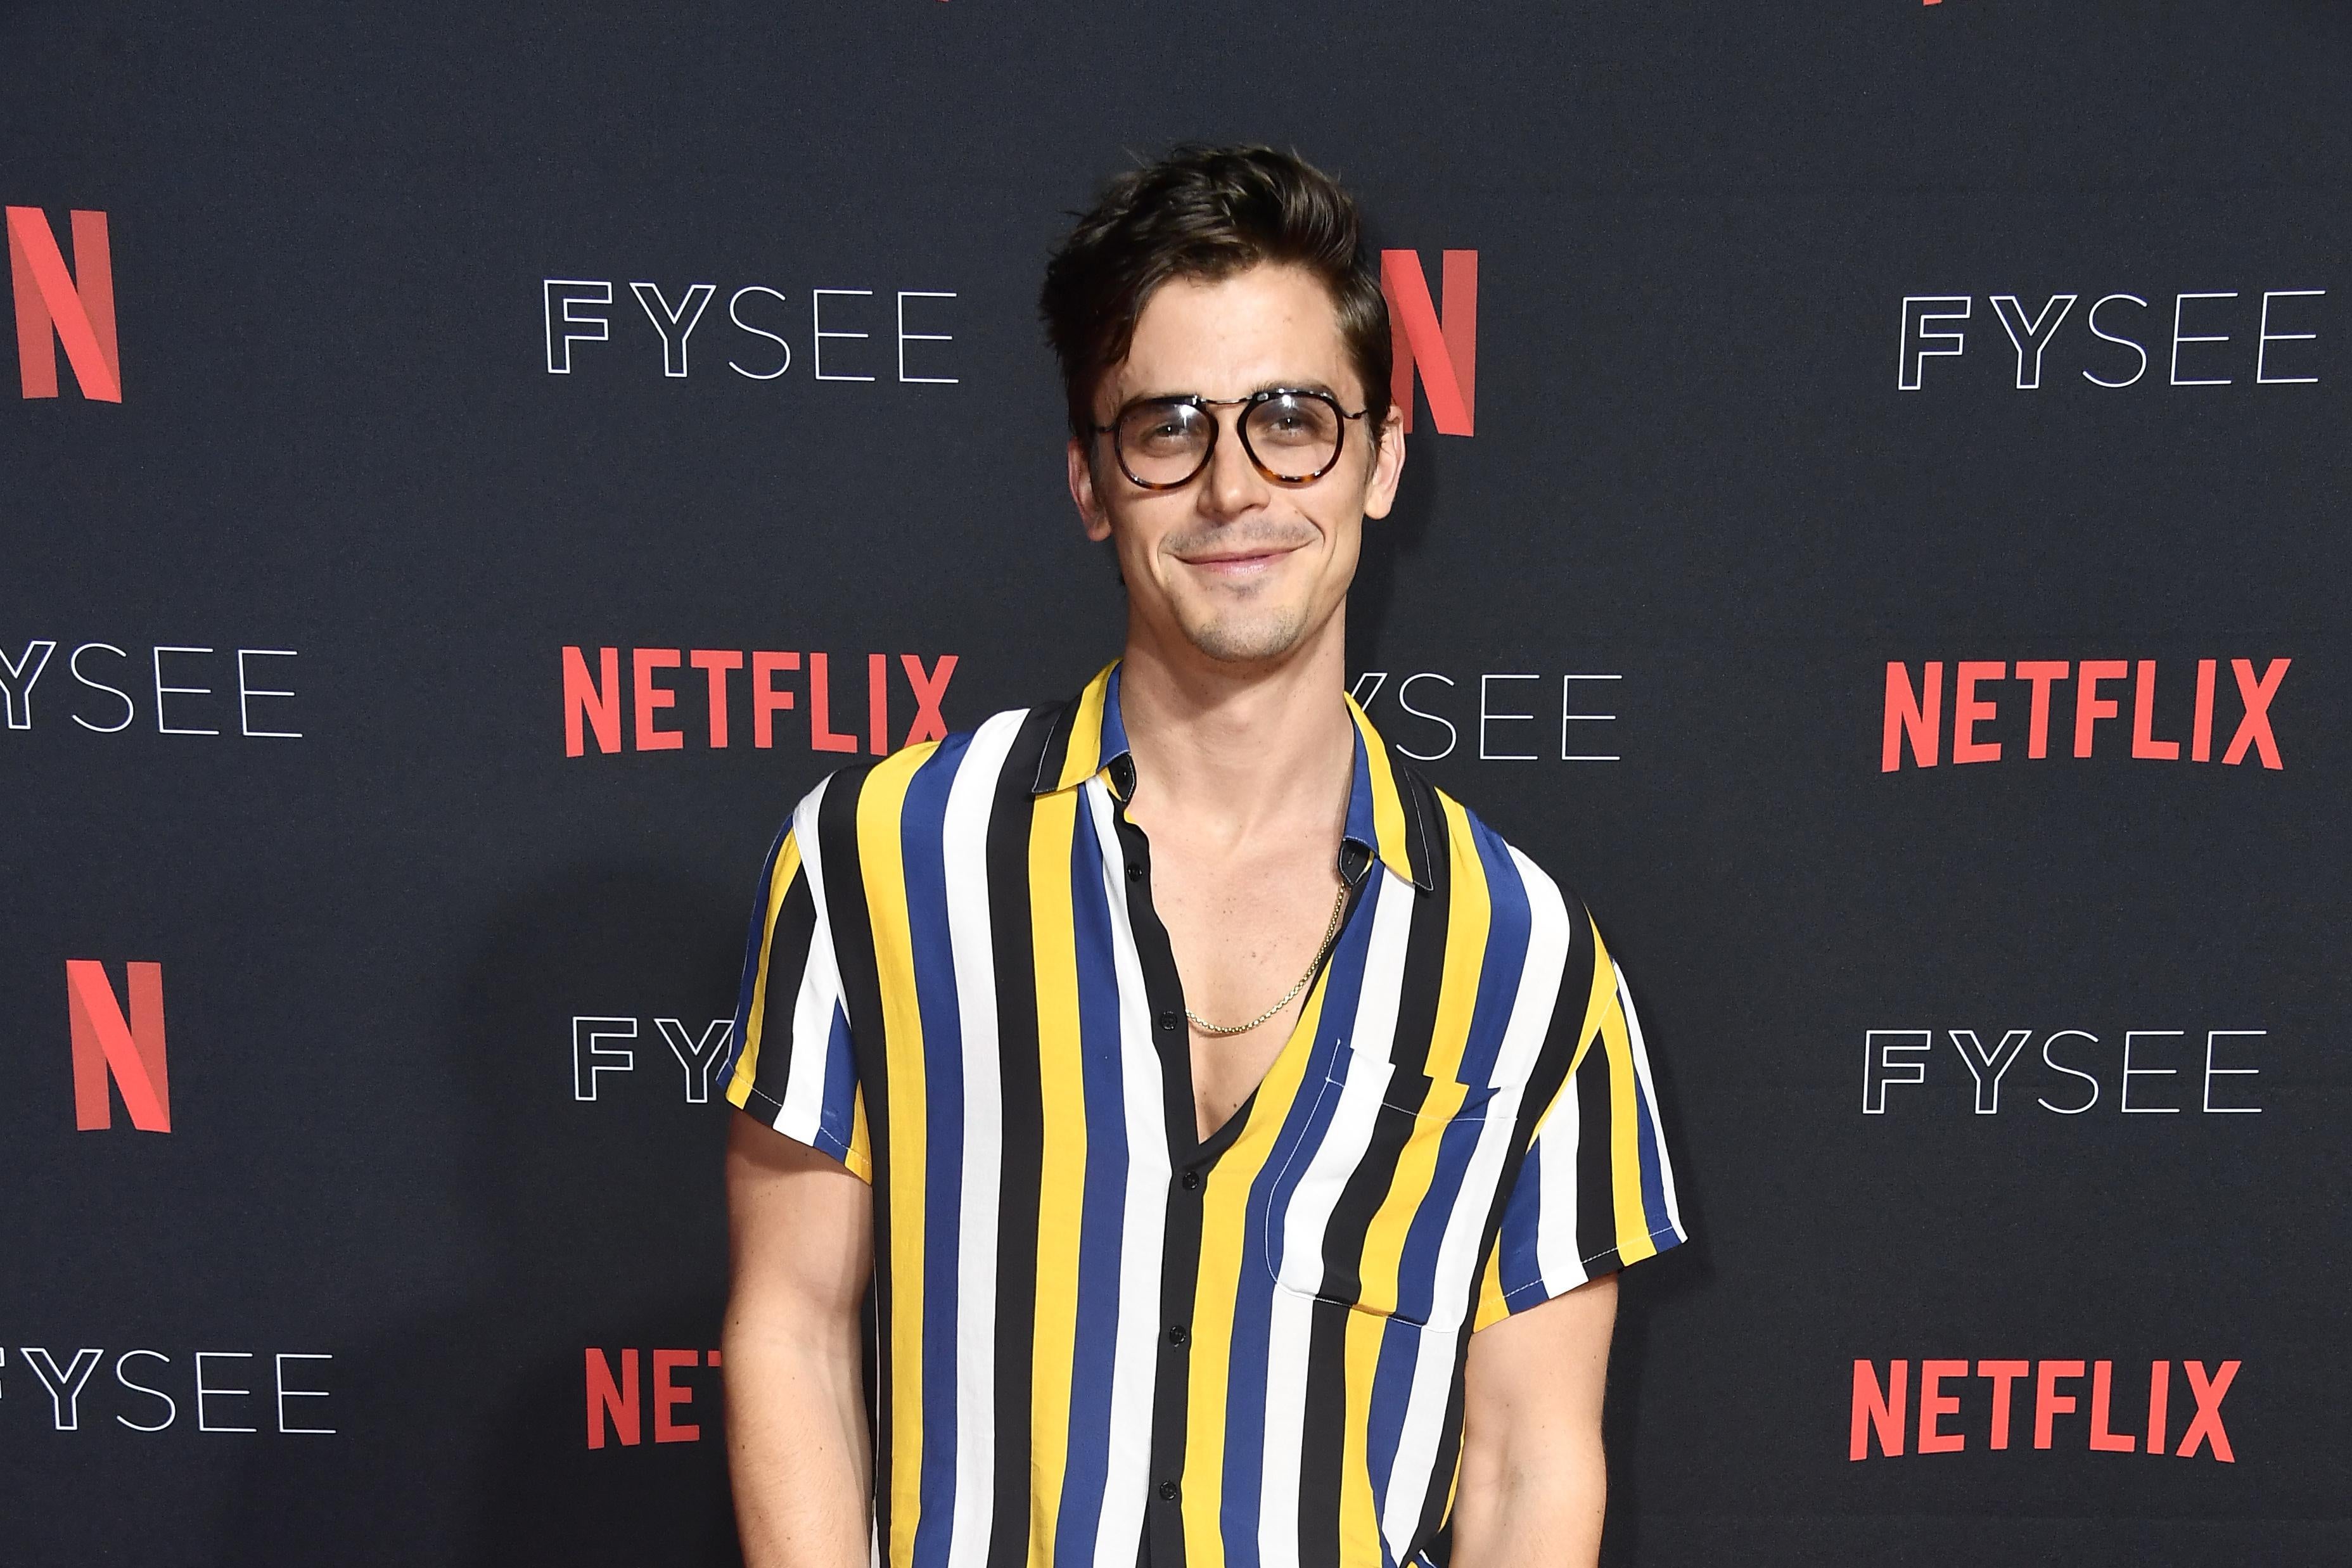 Antoni Porowski on the red carpet at a Netflix FYSee event in Los Angeles on May 31.